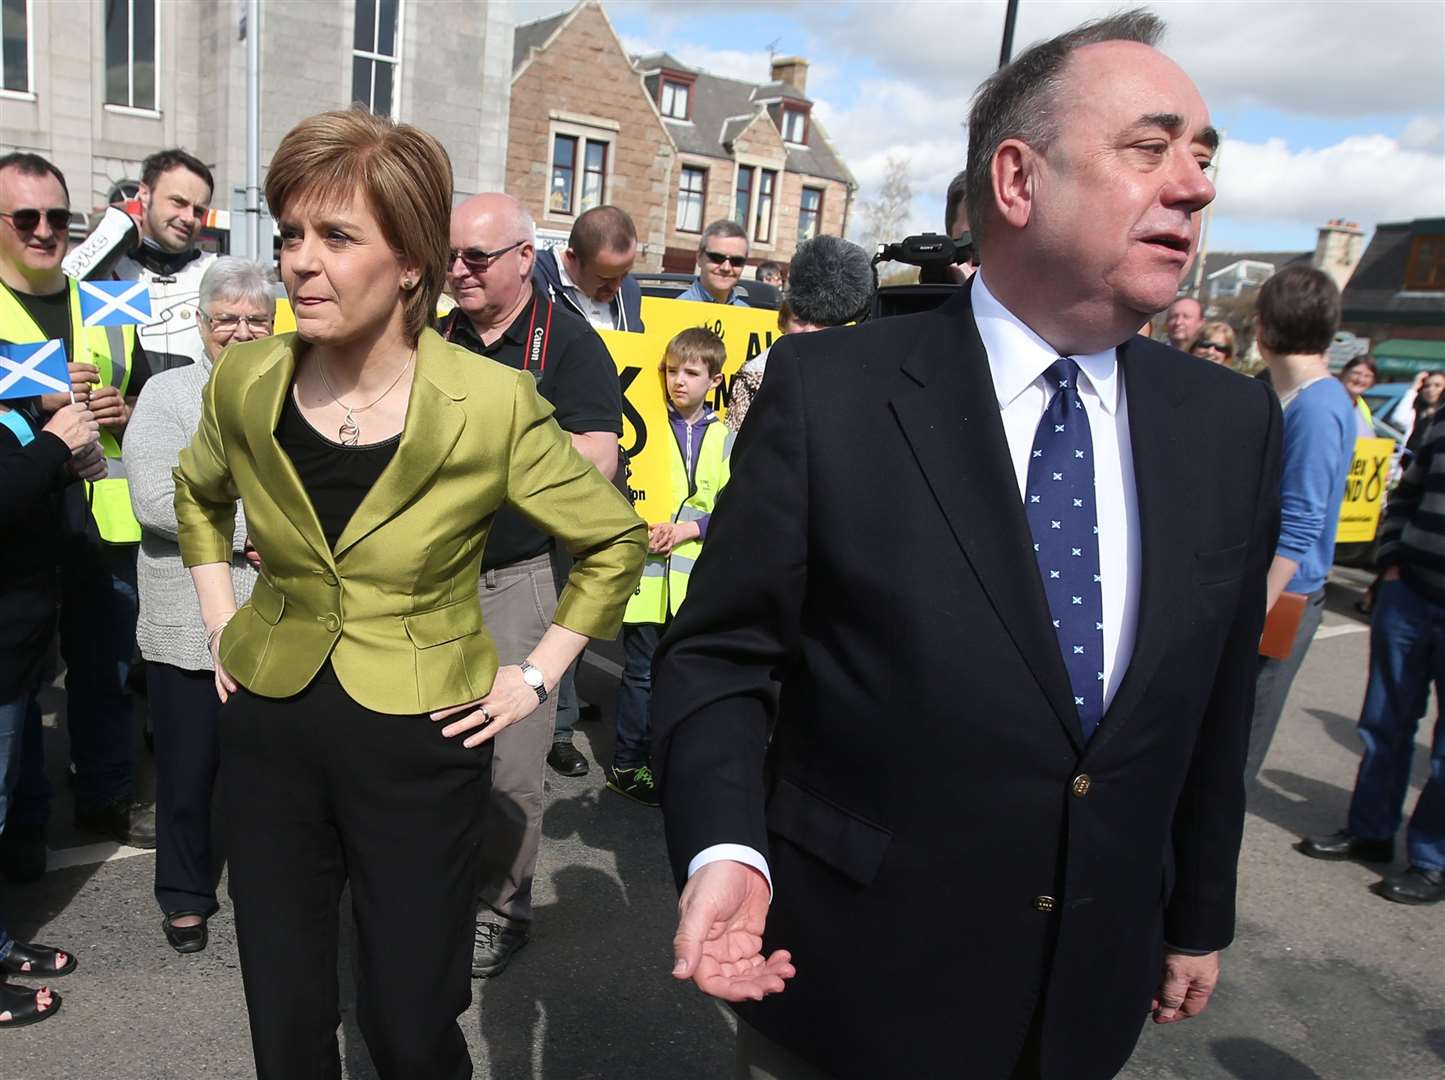 Alex Salmond and Nicola Sturgeon, pictured in 2015, are both expected to give evidence to the committee in the coming days (PA)